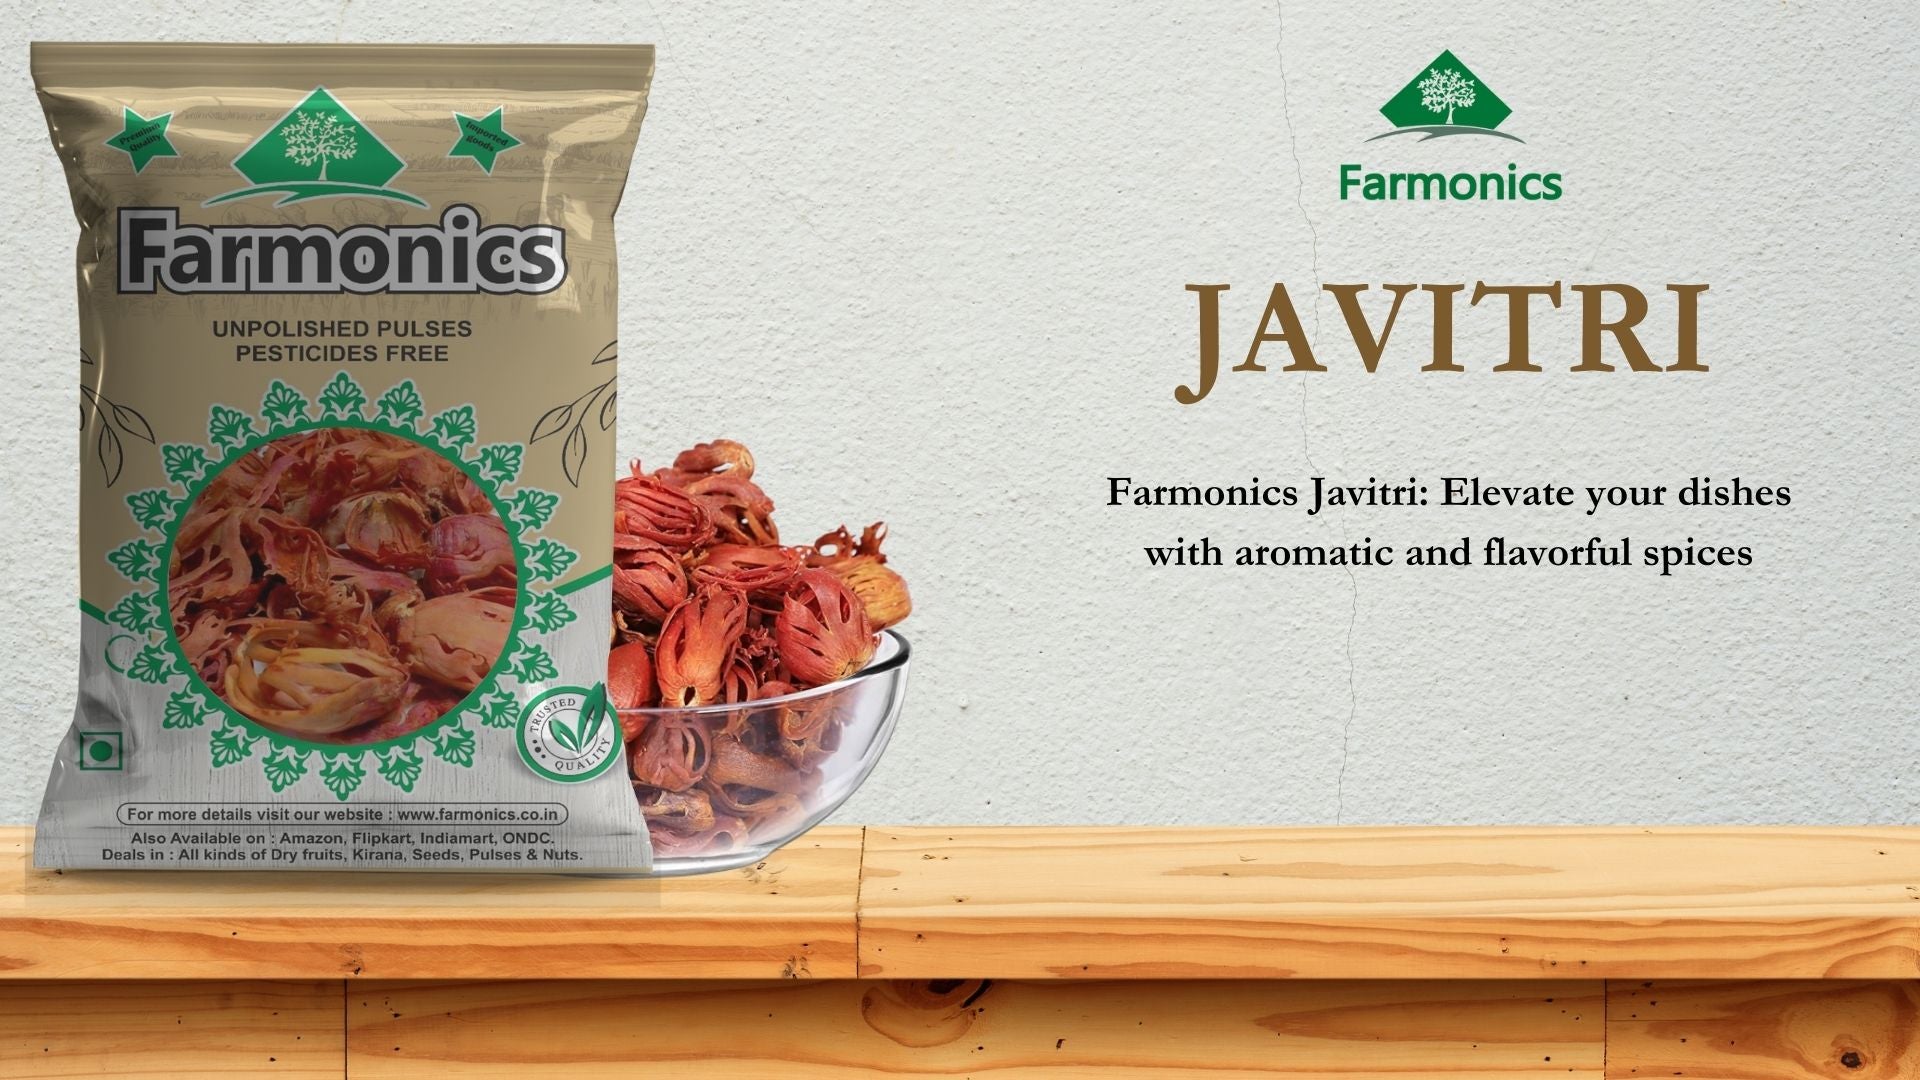 Farmonics javitri: eleavate your dishes with aromatic and flavorful spices